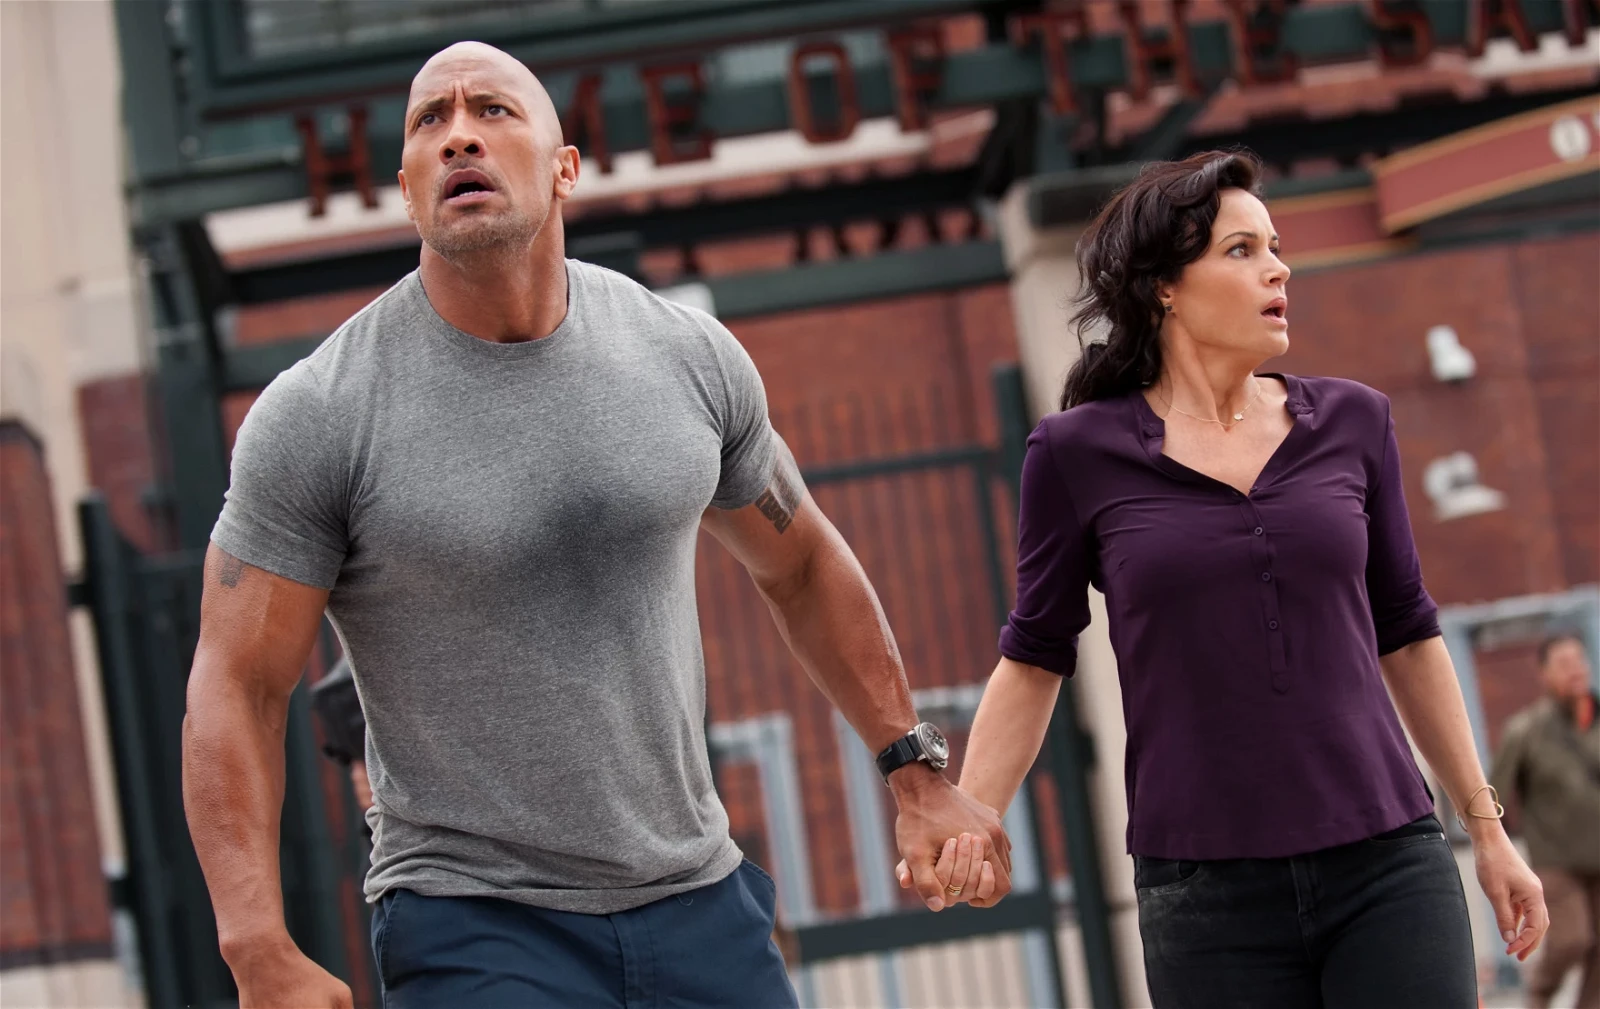 Dwayne "The Rock" Johnson and Carla Gugino star in the action thriller San Andreas.